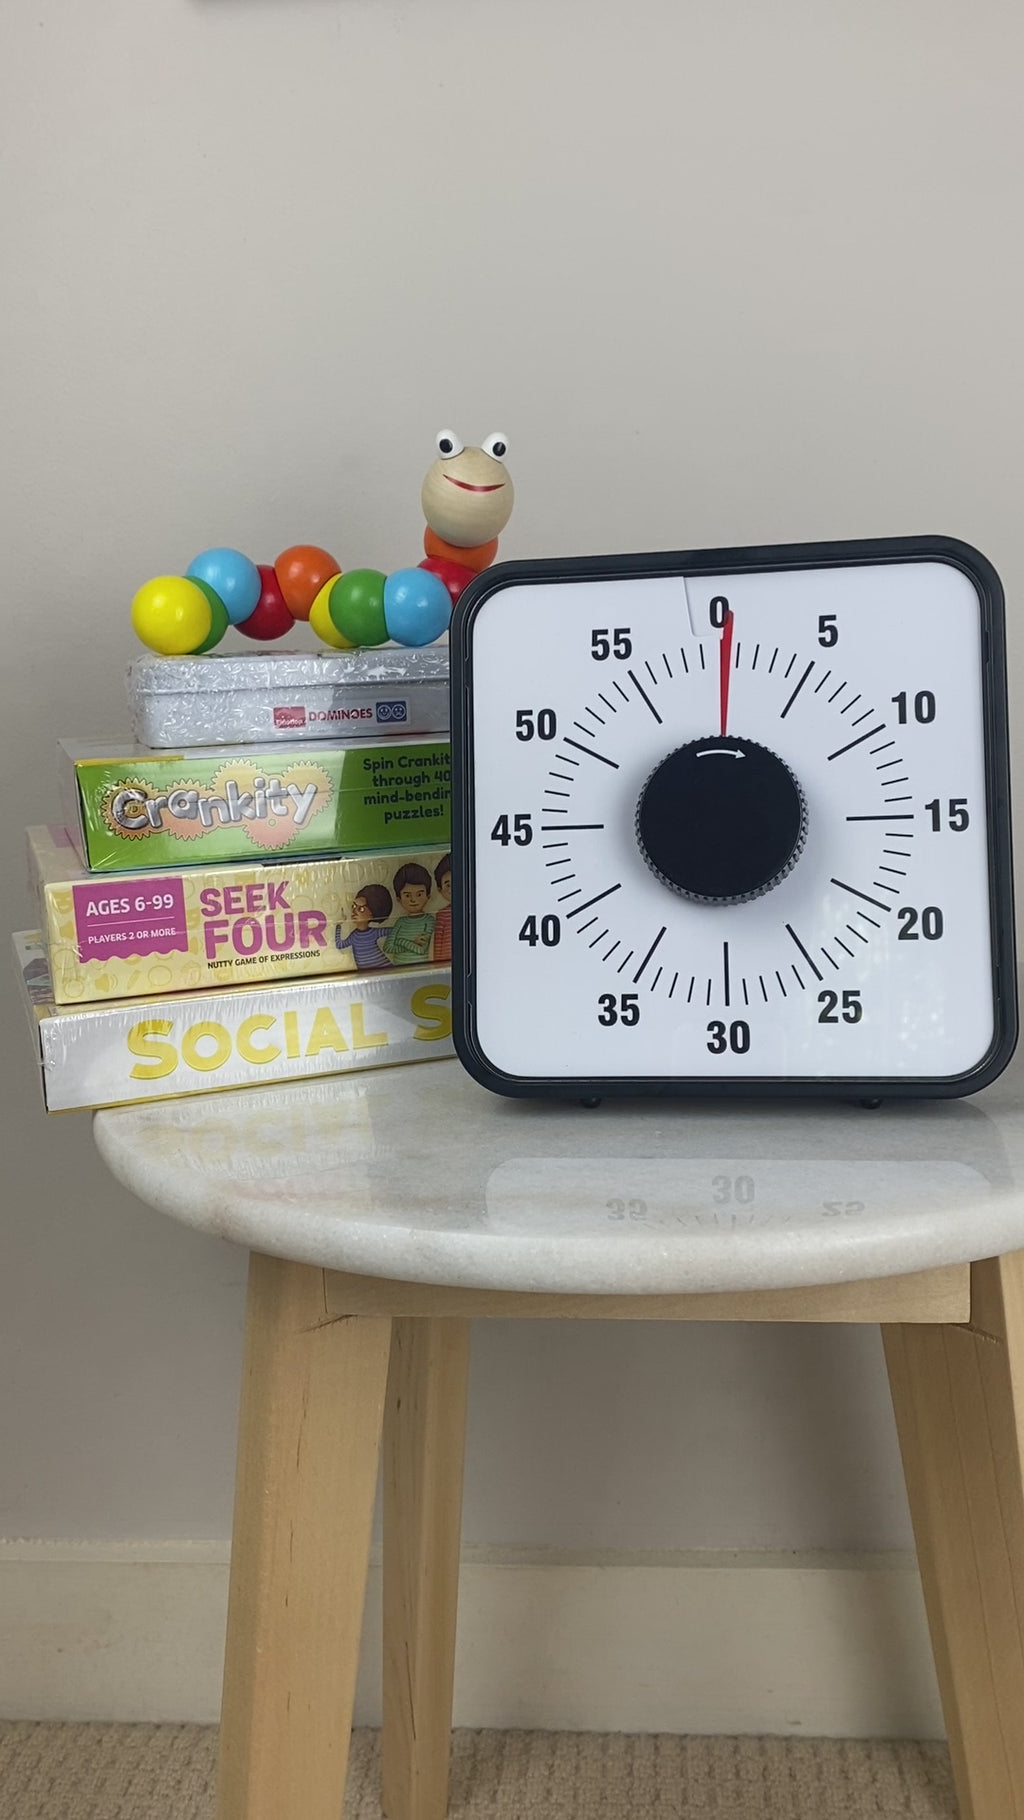 Countdown Timer (8" / 20cm) Activity Time Timer for School, Work, Home or Sports